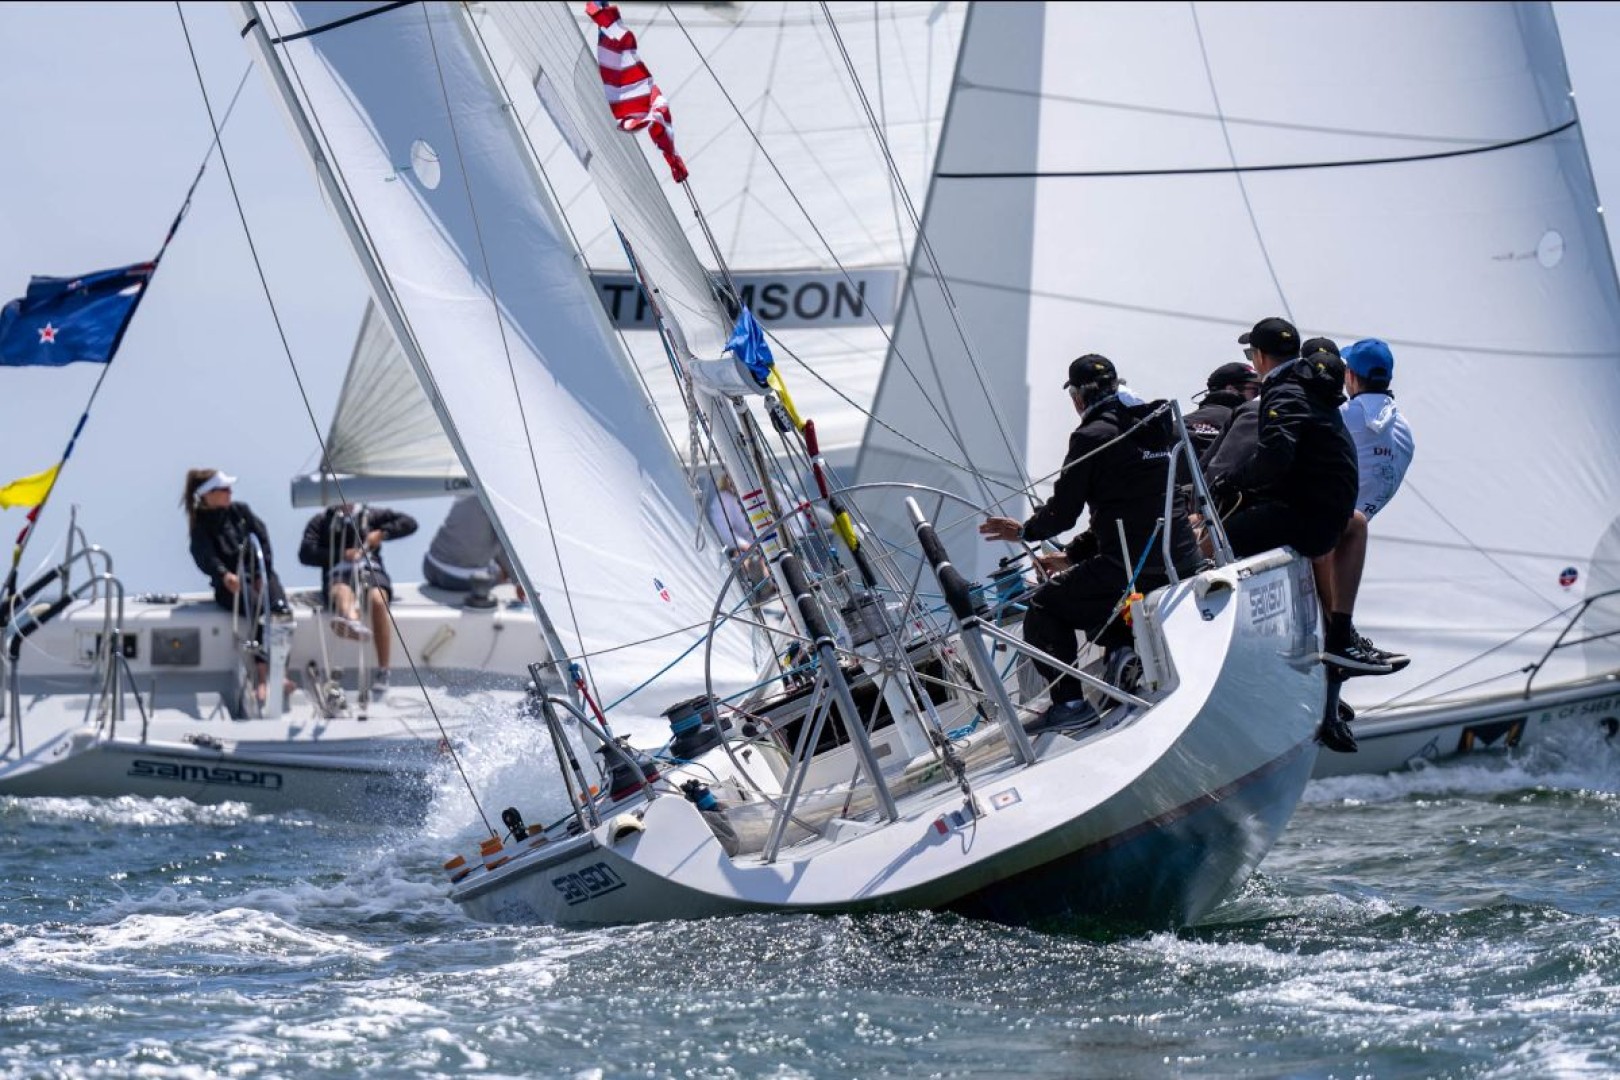 World Match Racing Tour: sparks fly on day one of Congressional Cup